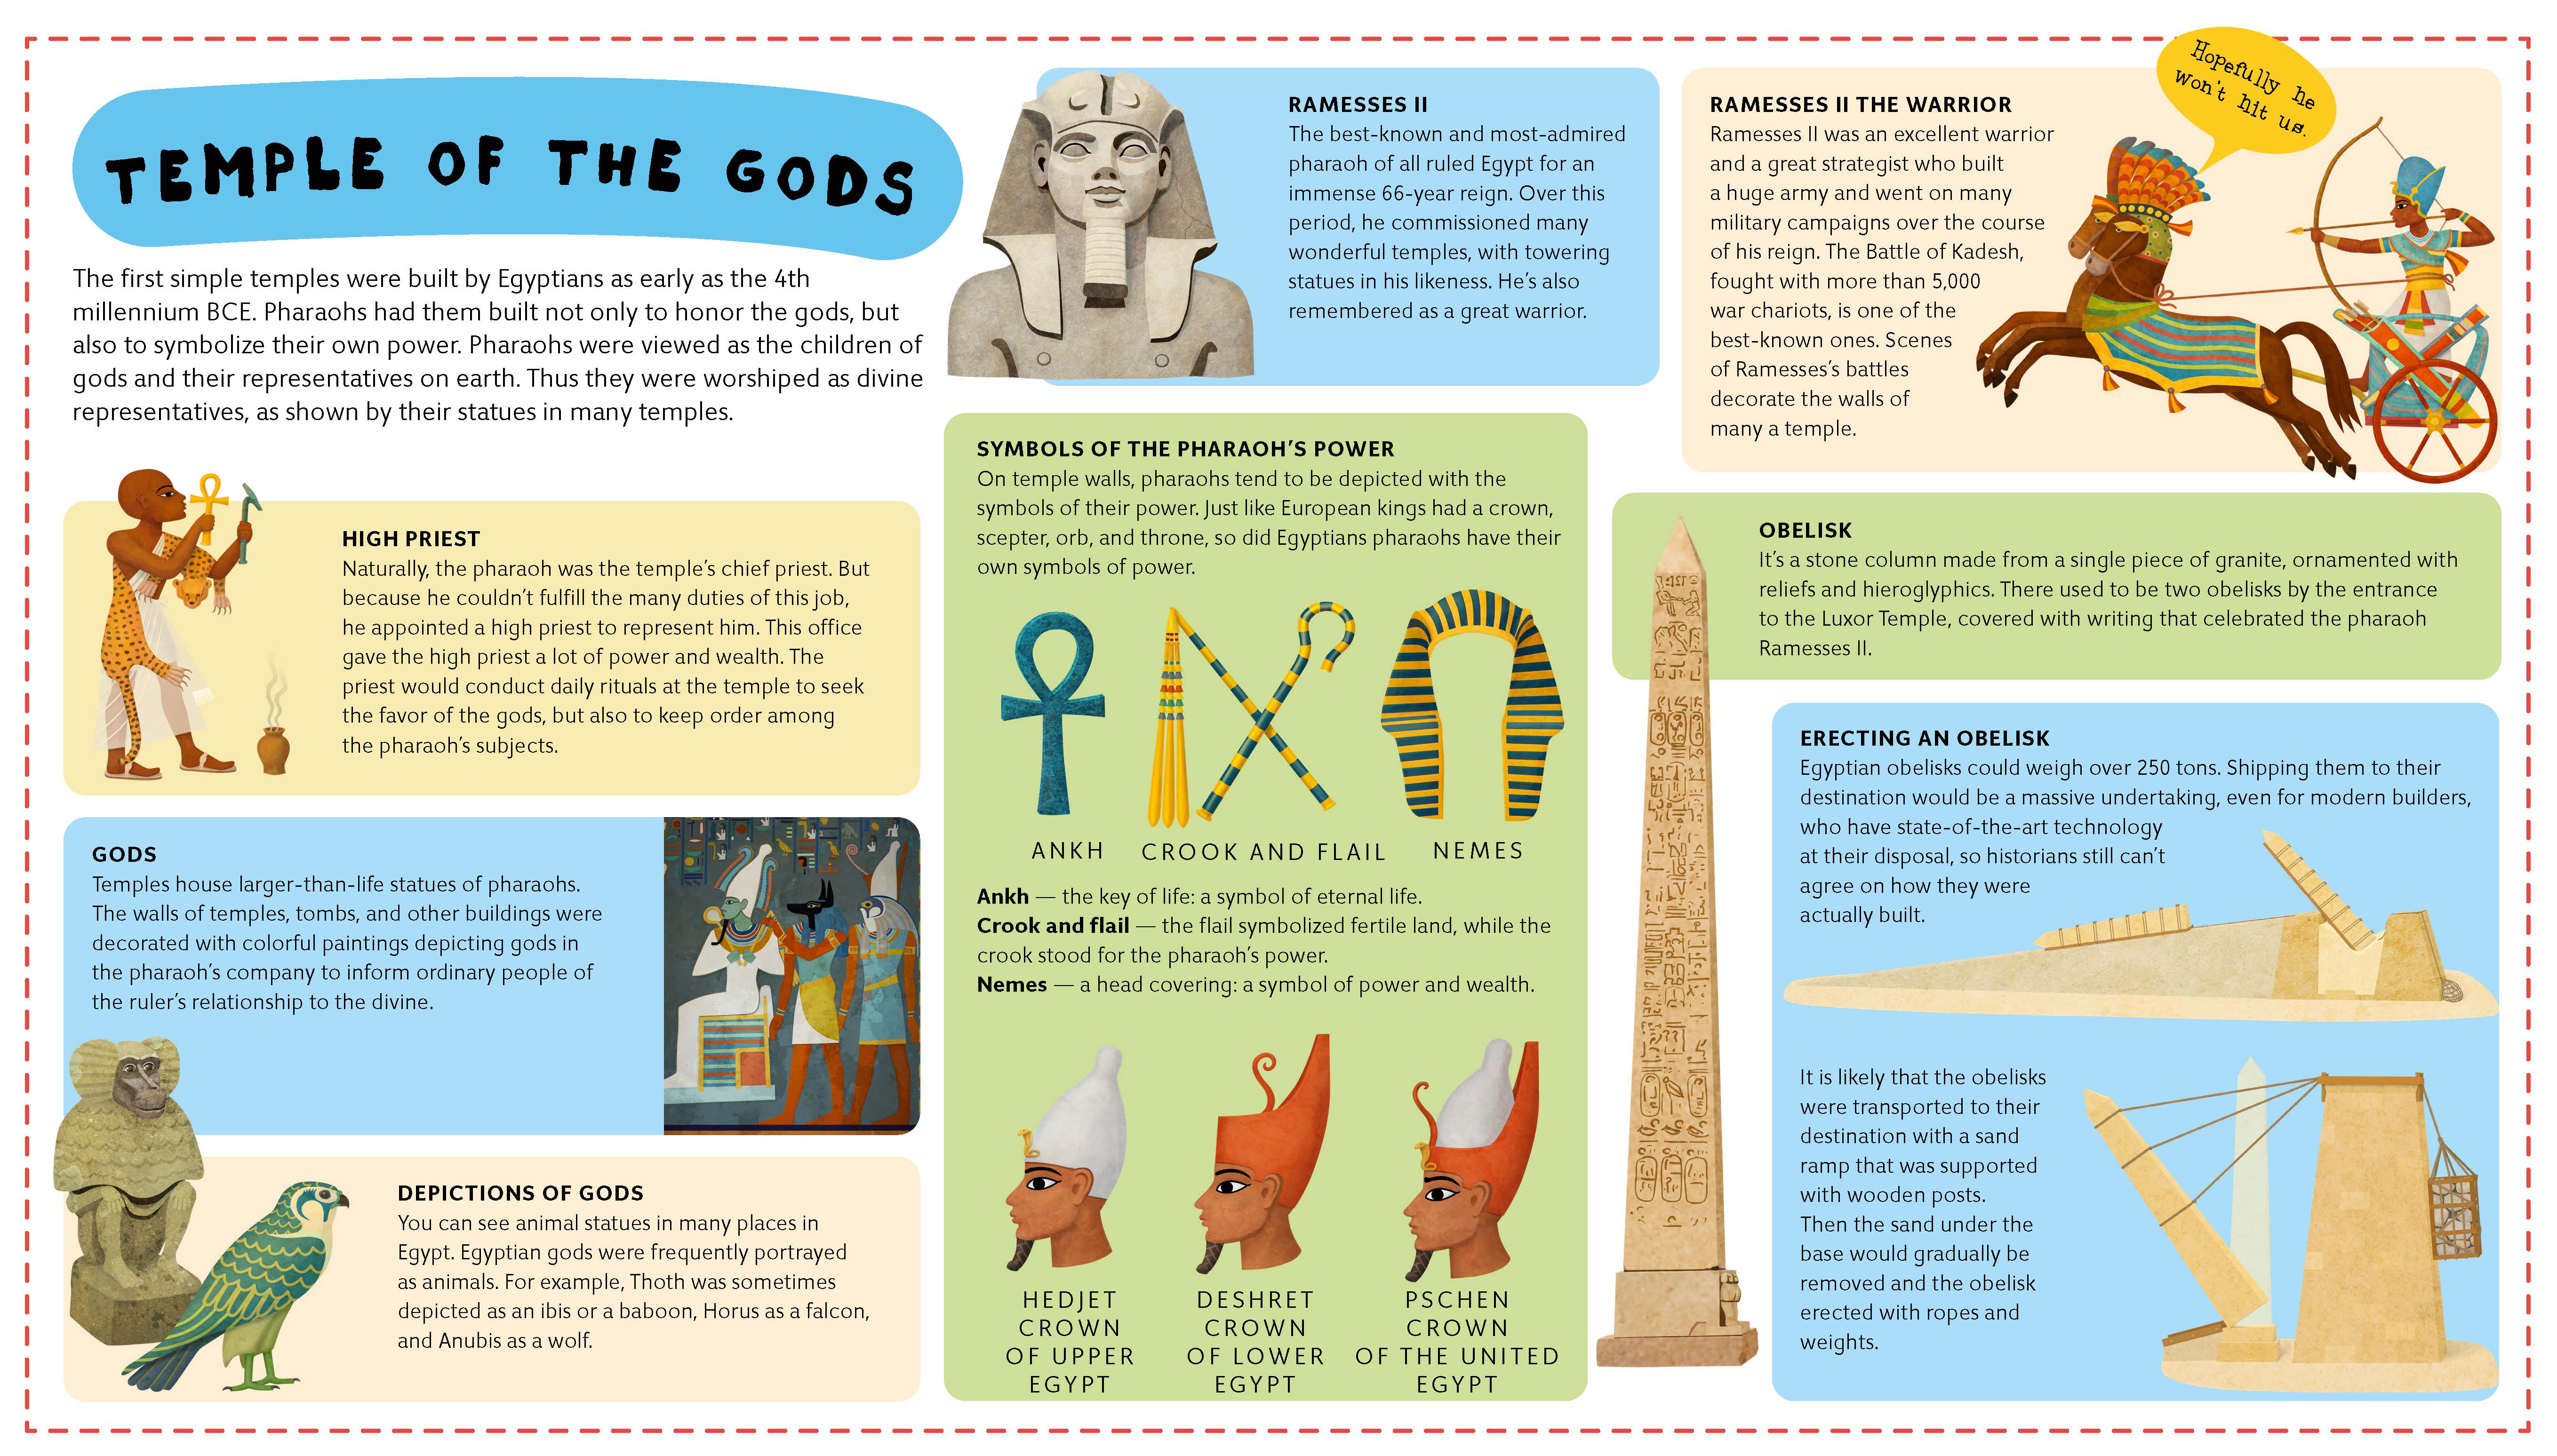 Ancient Egypt for Kids